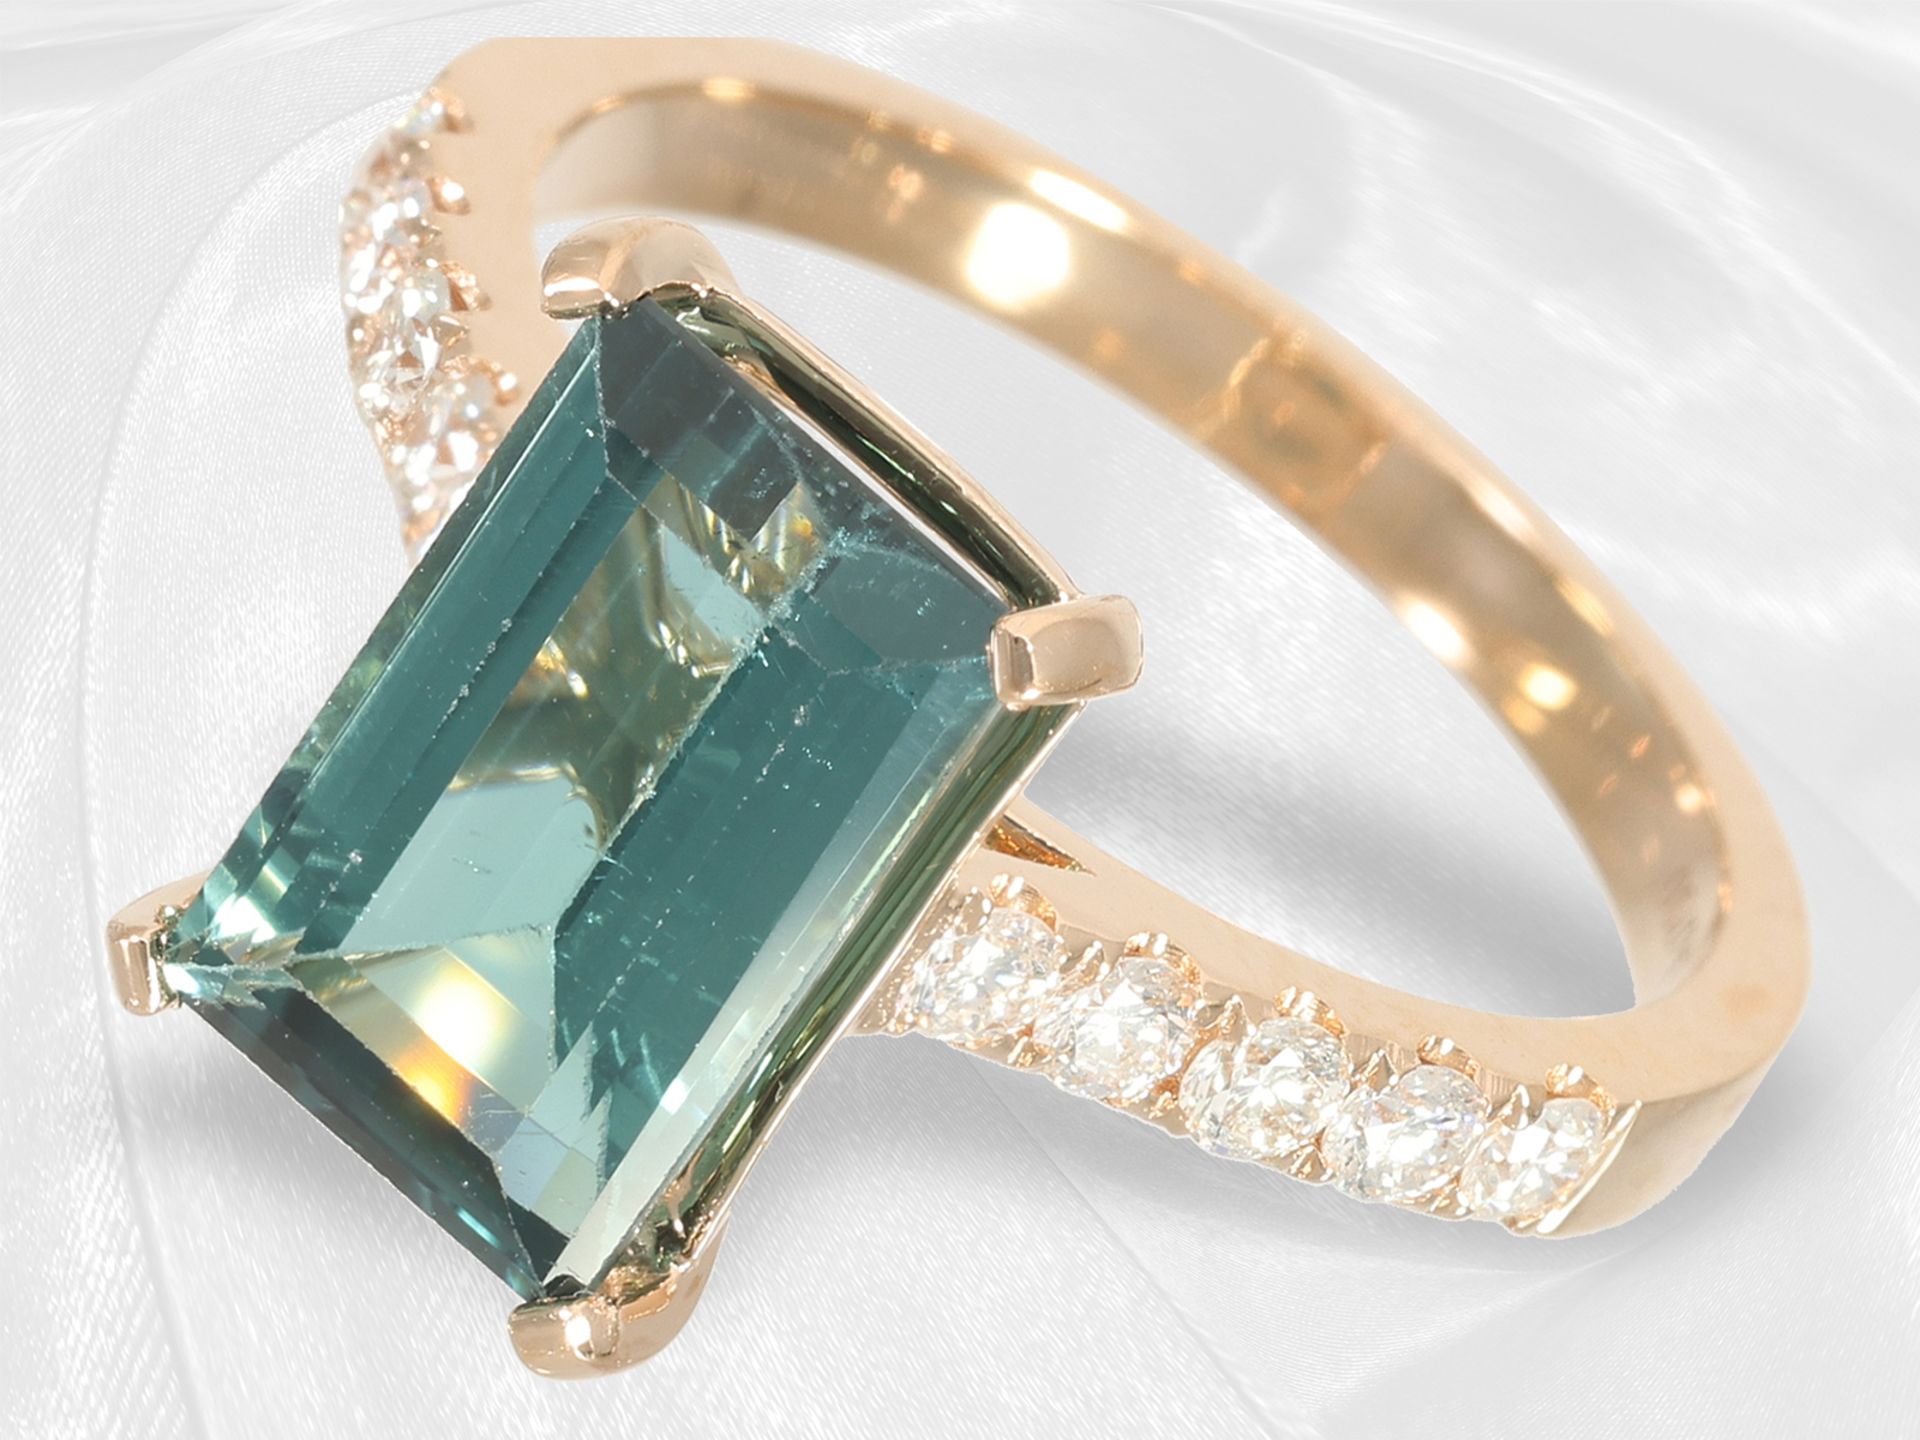 Ring: beautiful goldsmith's ring with tourmaline and brilliant-cut diamonds, 18K gold